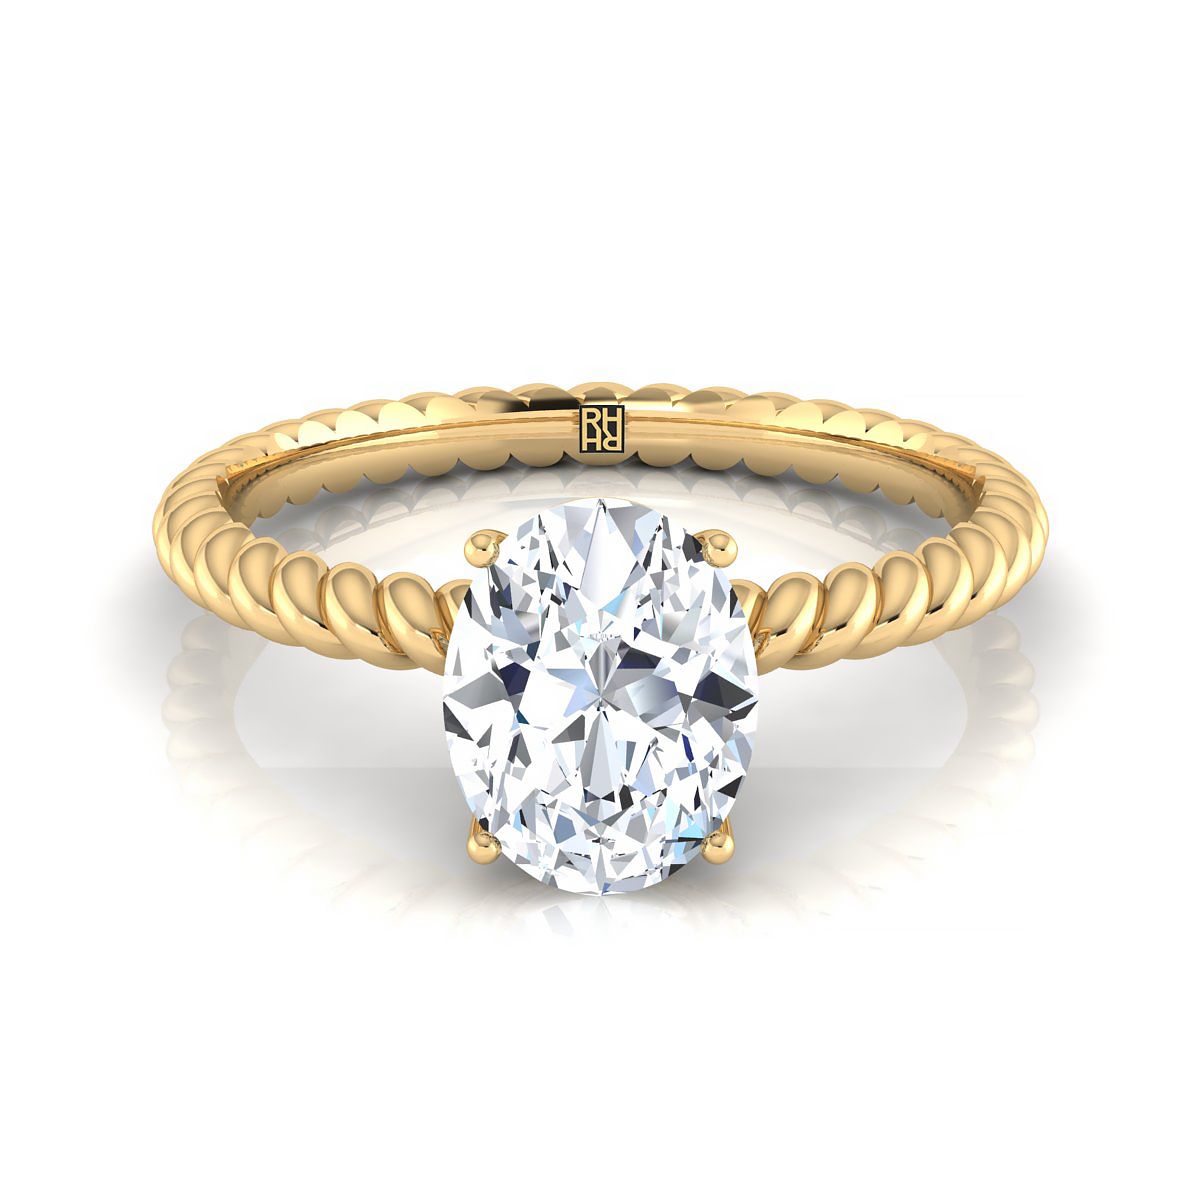 18K Yellow Gold Oval Diamond Twisted Rope Solitaire With Surprise Stone Engagement Ring